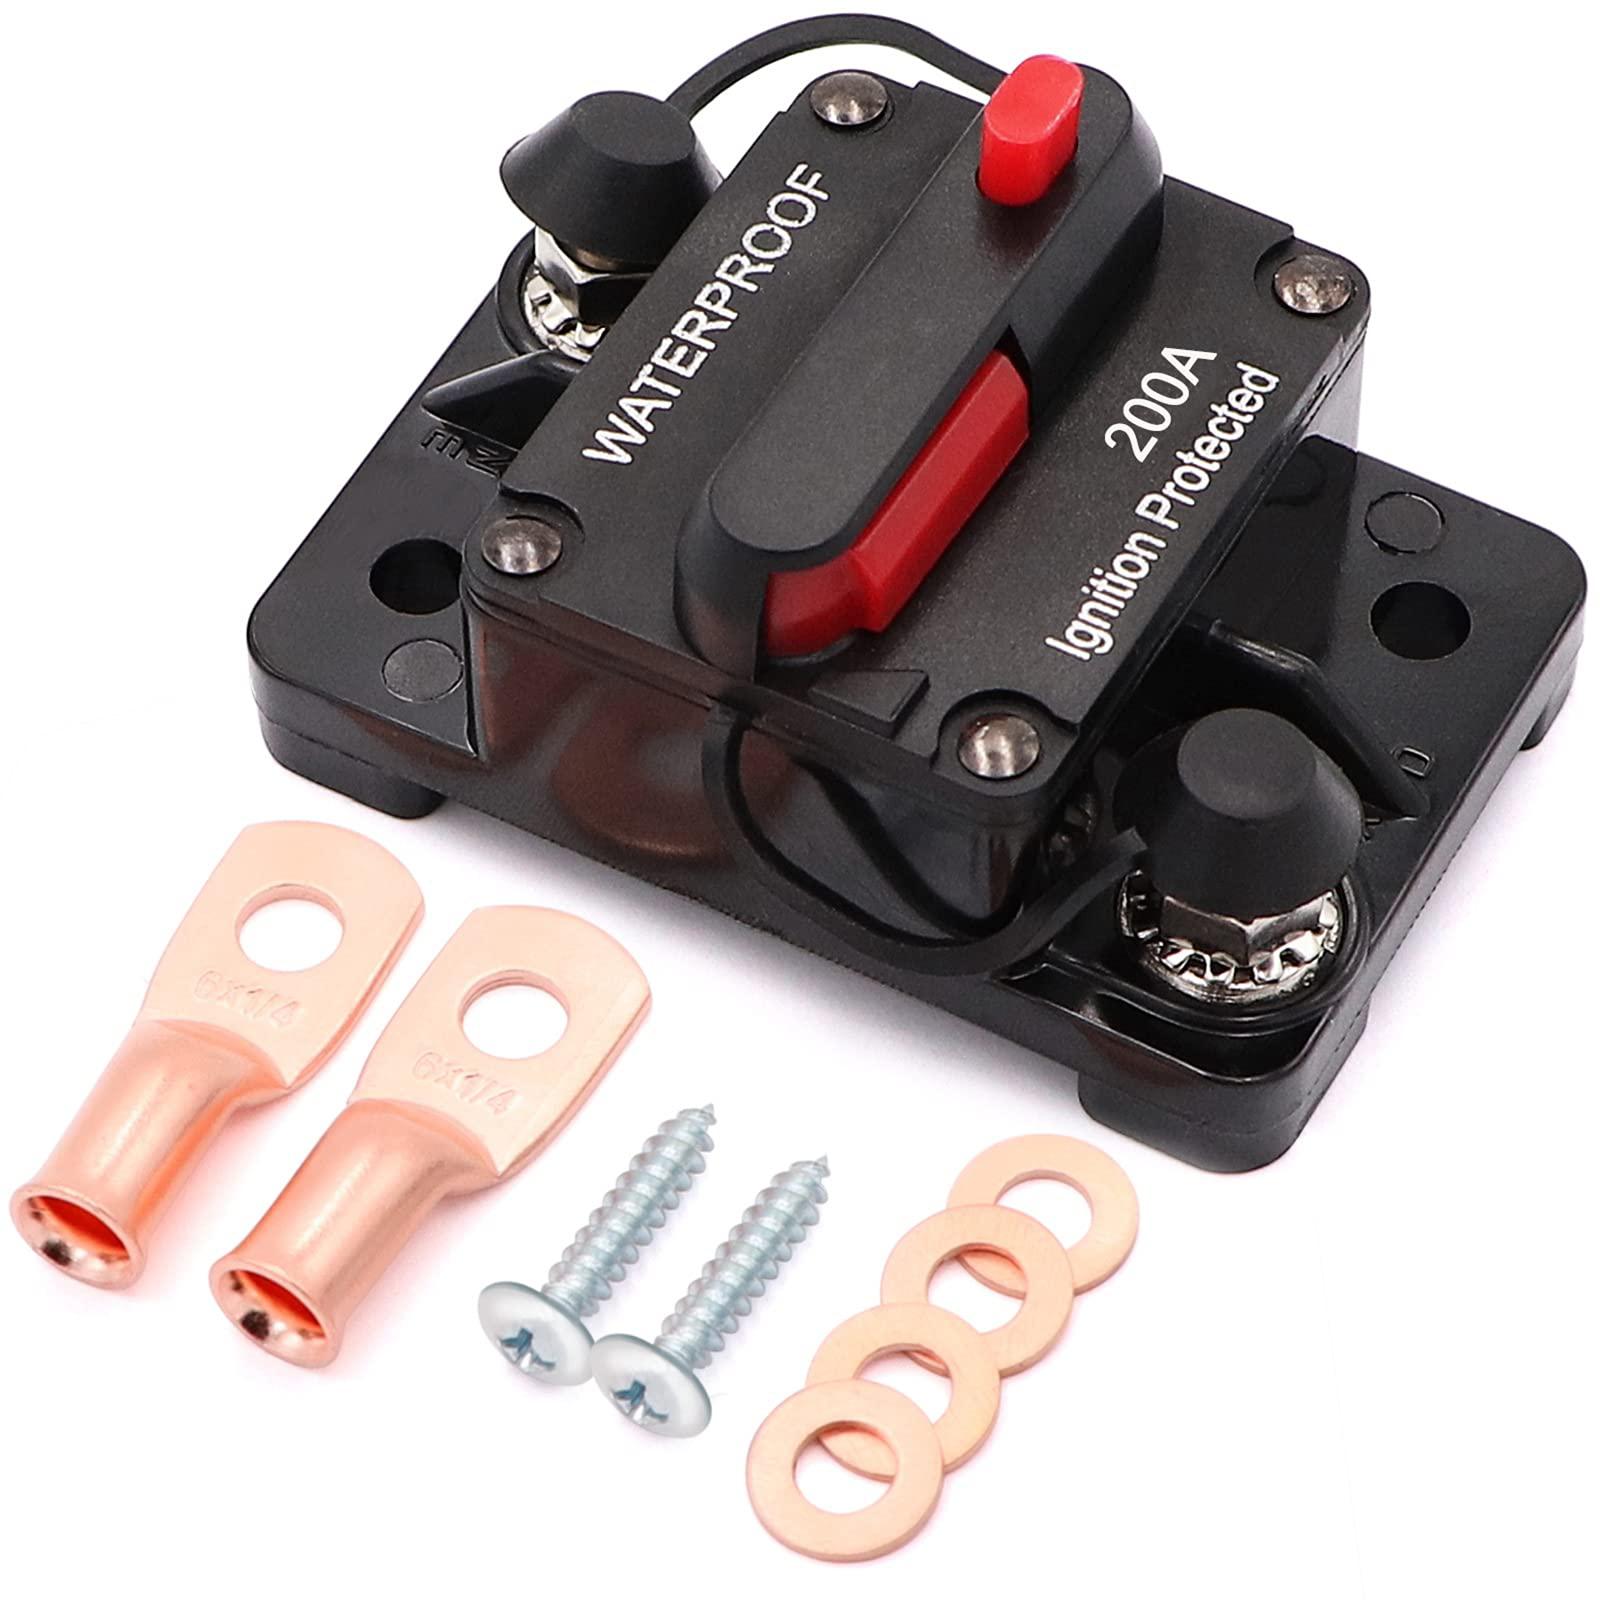 jeemiter 200 amp circuit breaker with manual reset wire lugs copper washer and screws for car marine trolling motors boat atv